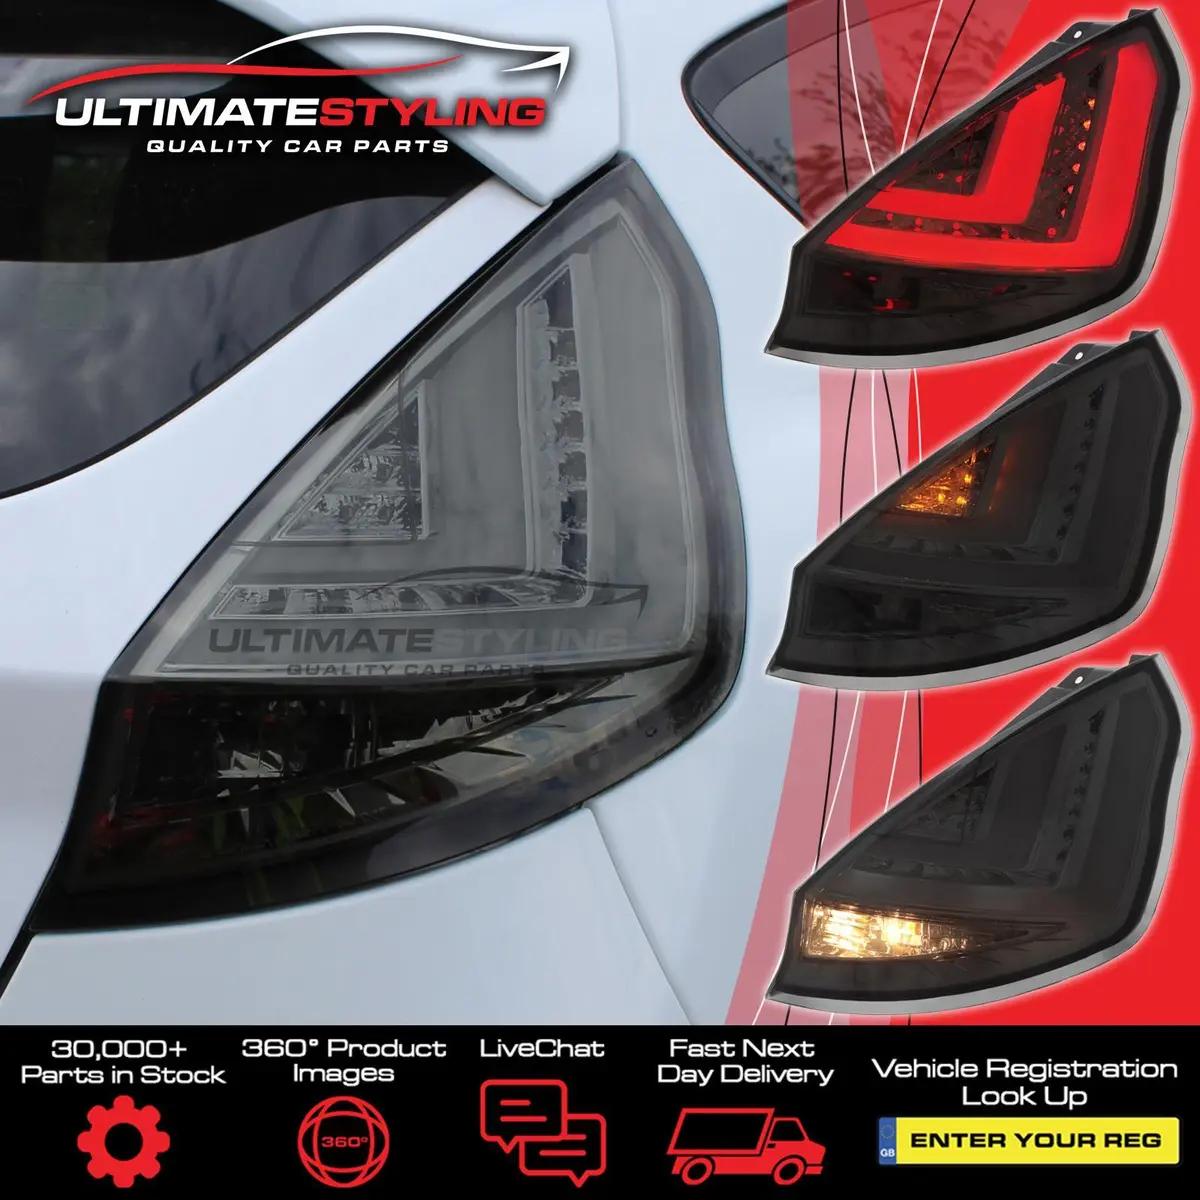 fiesta mk7 smoked rear lights - How many rear fog lights are there in the Ford Fiesta